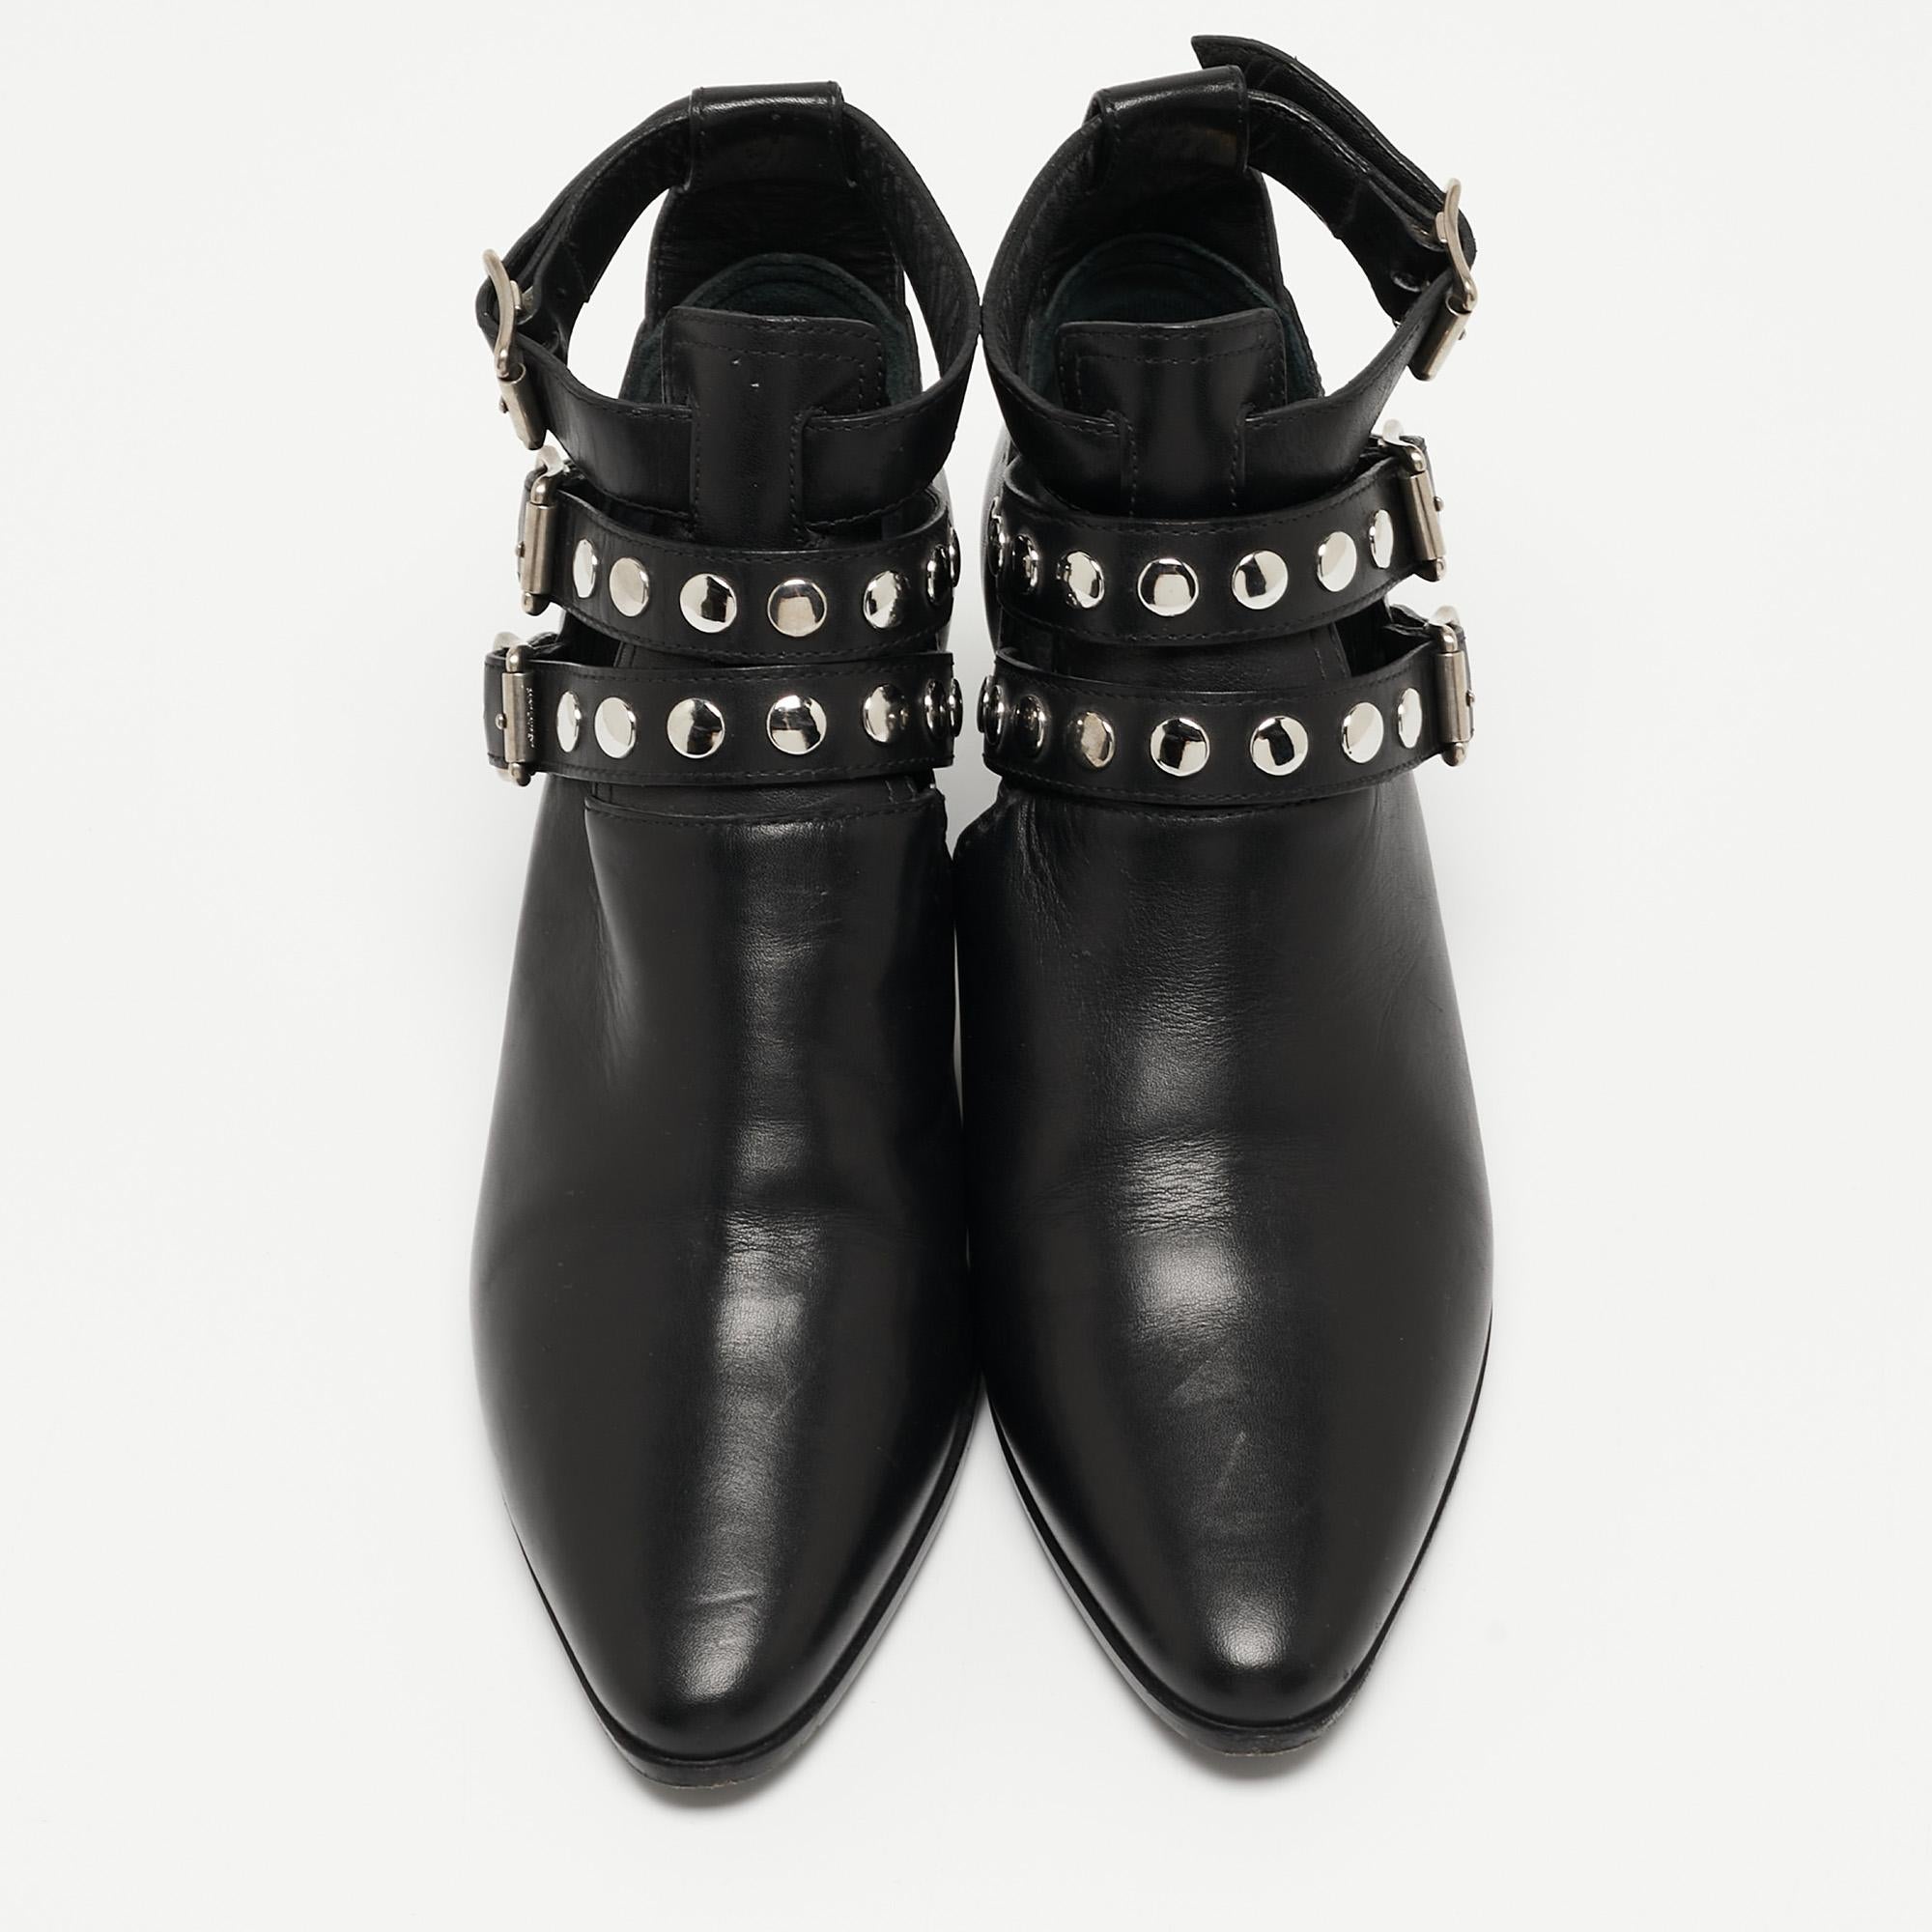 These Saint Laurent ankle boots are a fine choice. Offering the best of comfort and style, the pair has buckle straps to add an extra layer of style to any outfit.

Includes
Original Dustbag